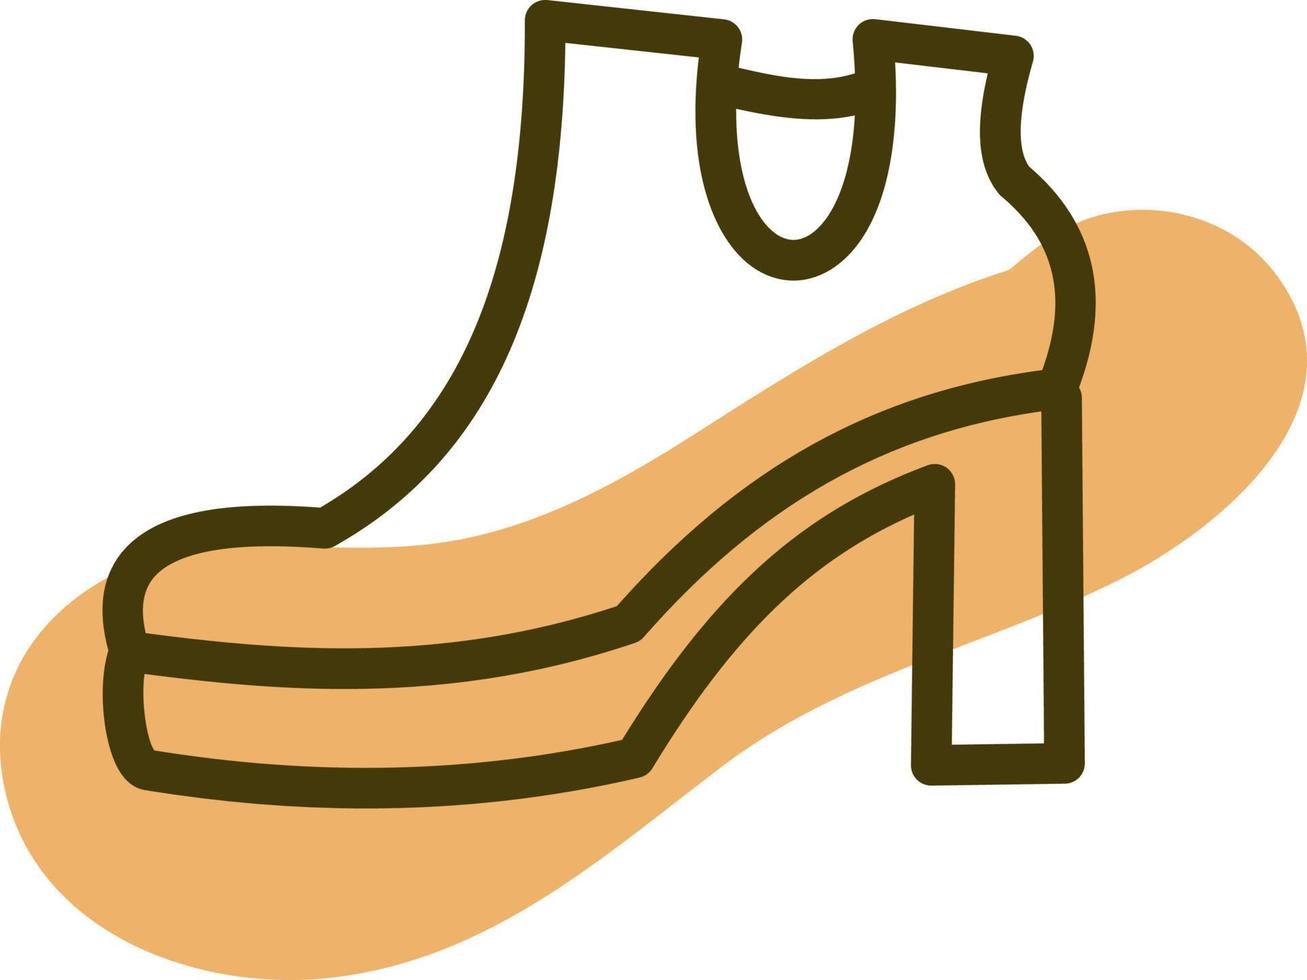 Orange simple womans boots, illustration, vector, on a white background. vector